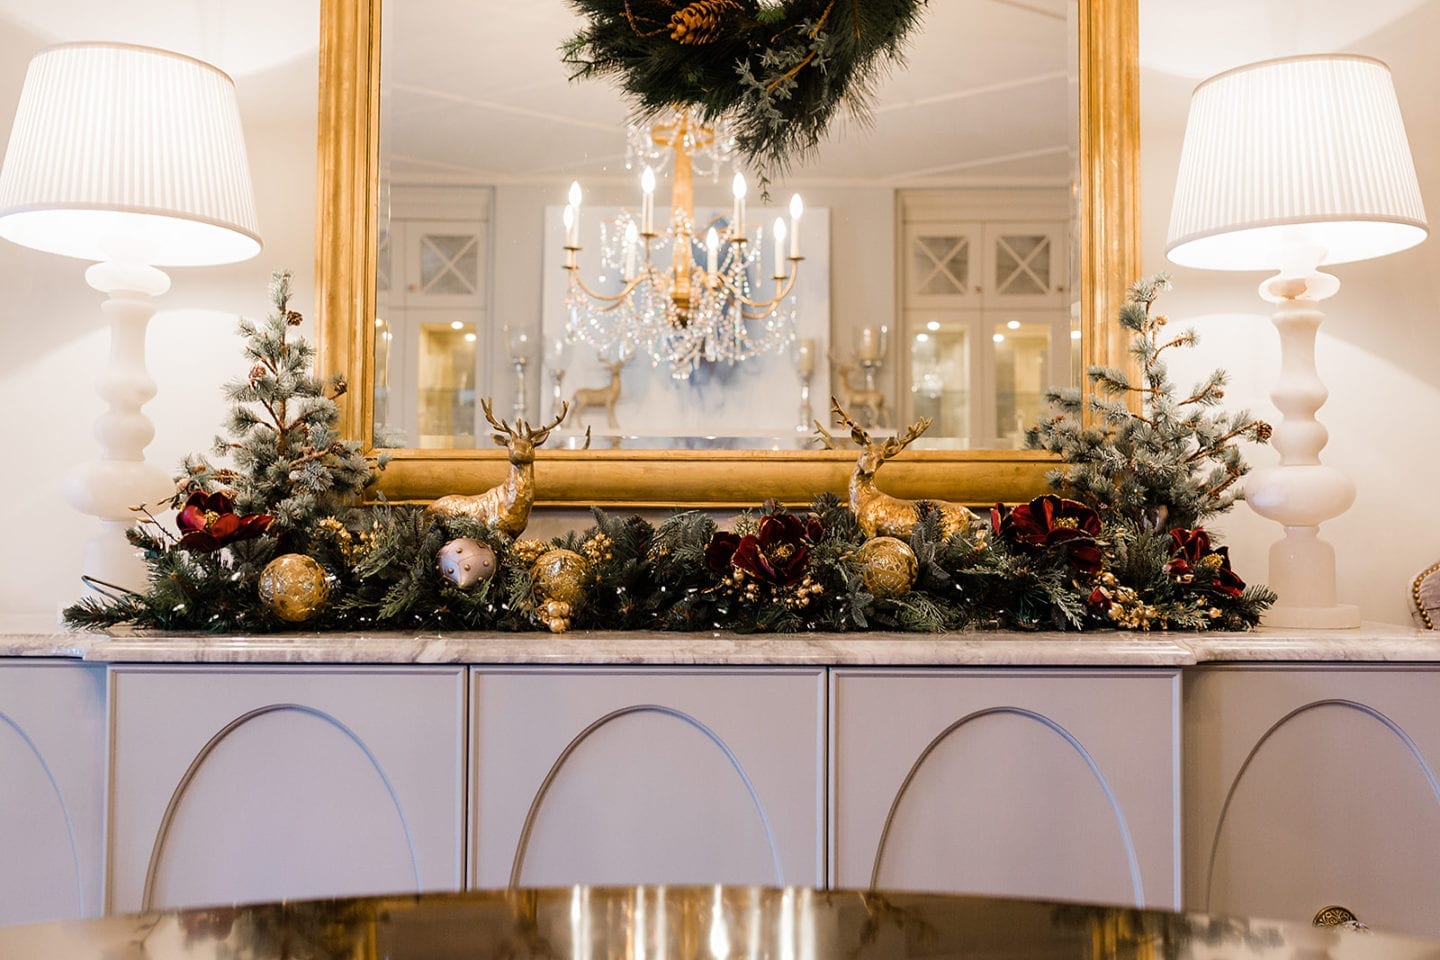 Need dining room christmas decorating ideas? Magnolia garland with lights. How to create a glamorous dining room setting for Christmas with gold reindeer and white table lamps.